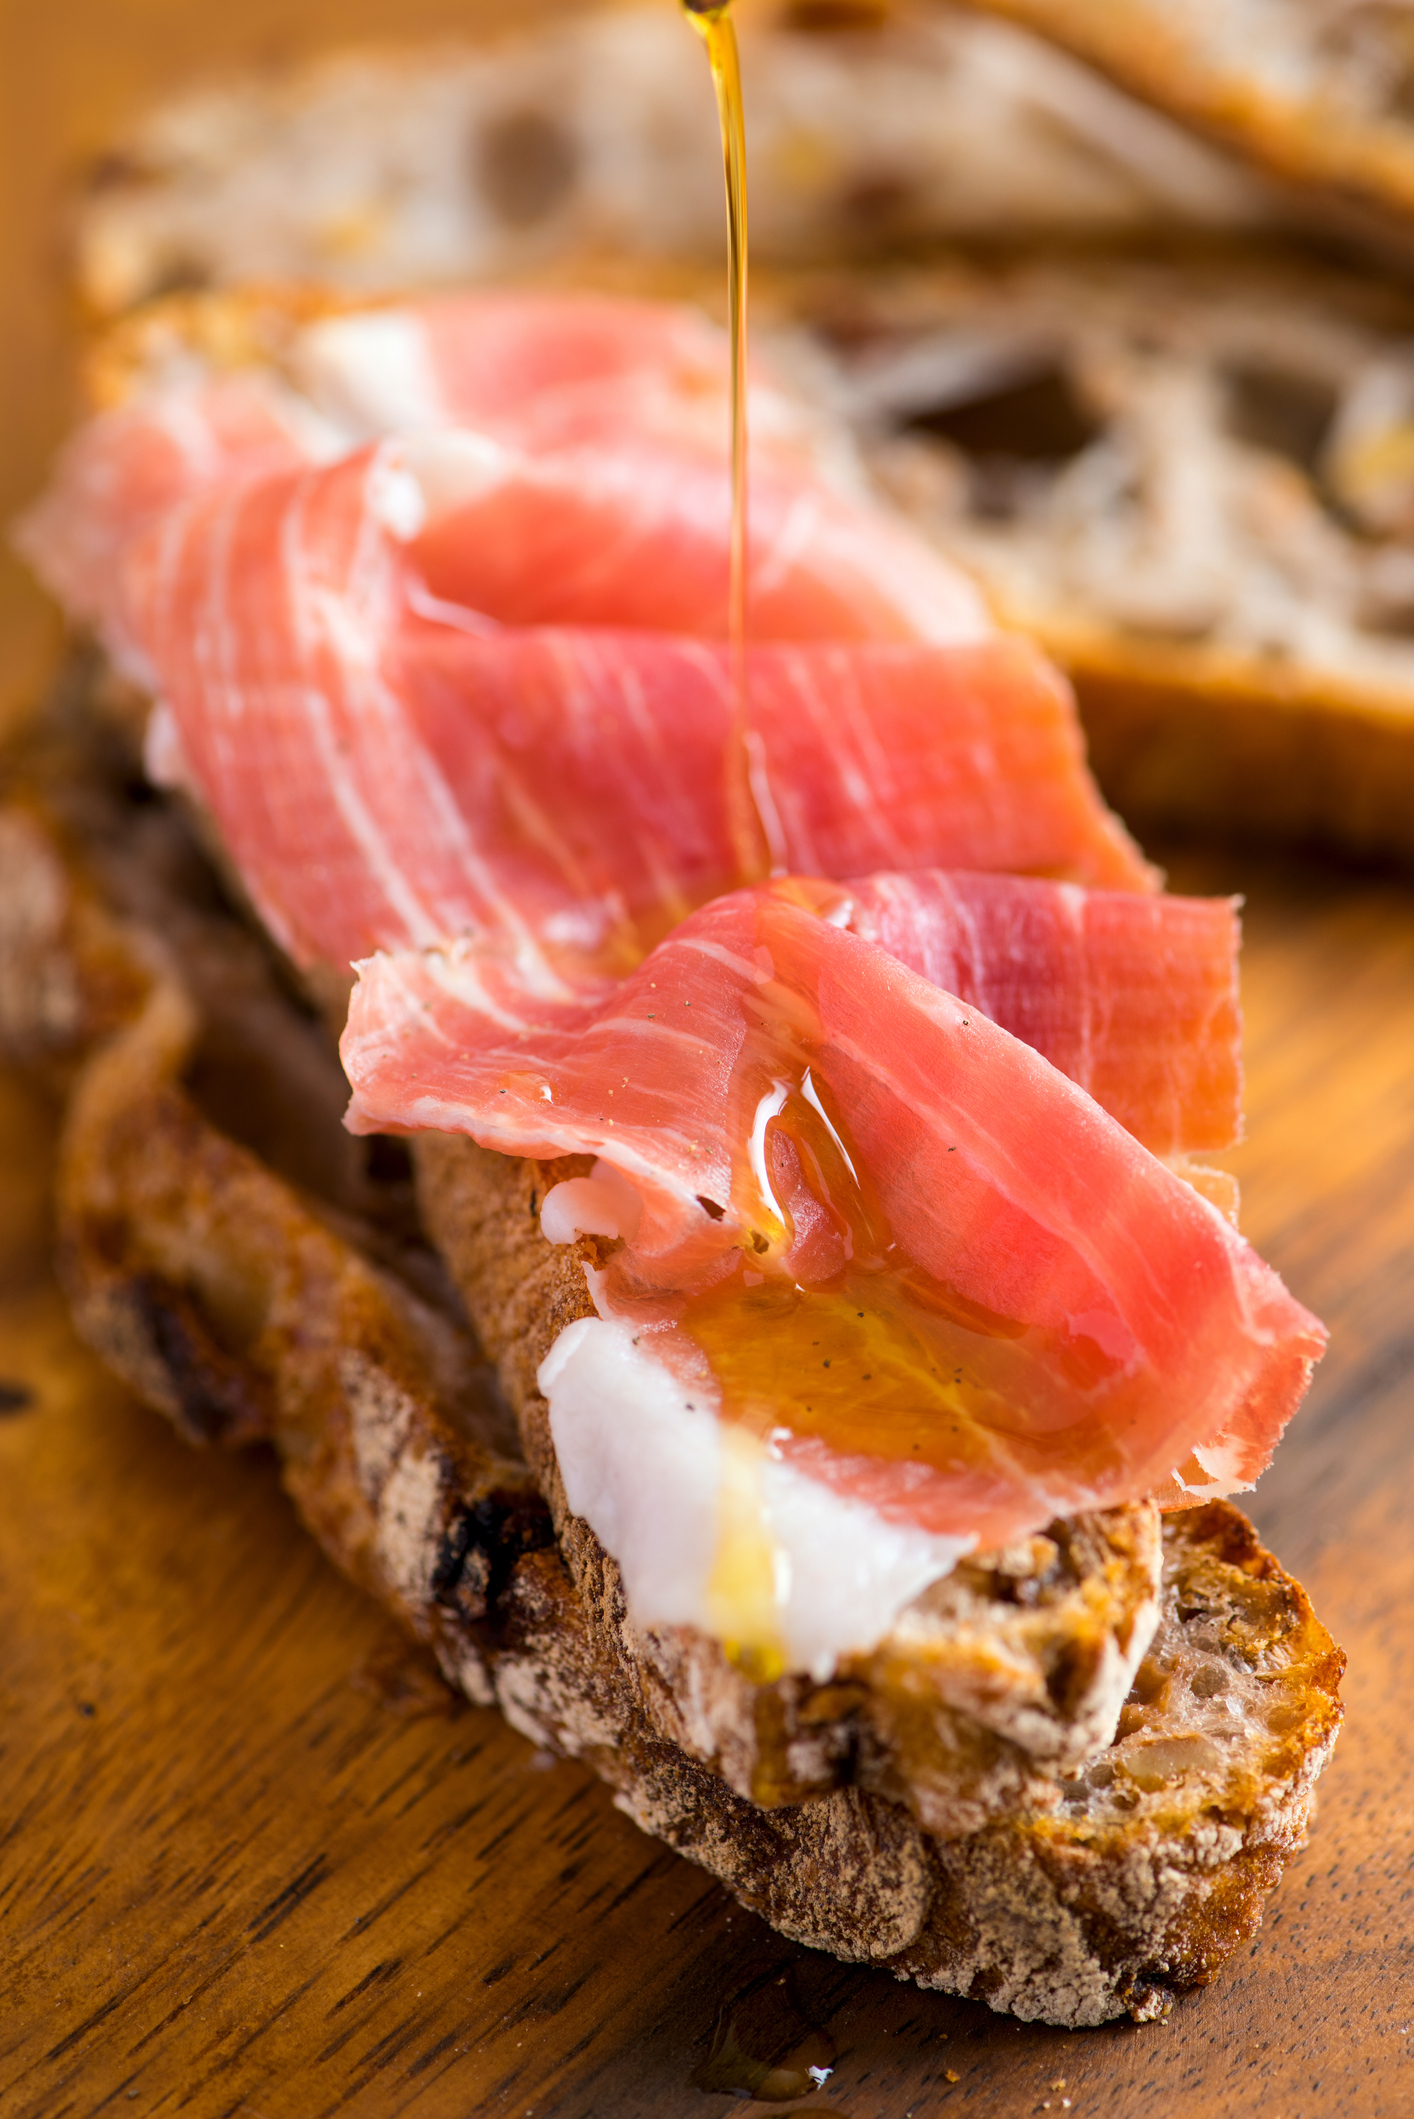 Honey drizzling on toast with prosciutto, next to sliced bread on a wooden board